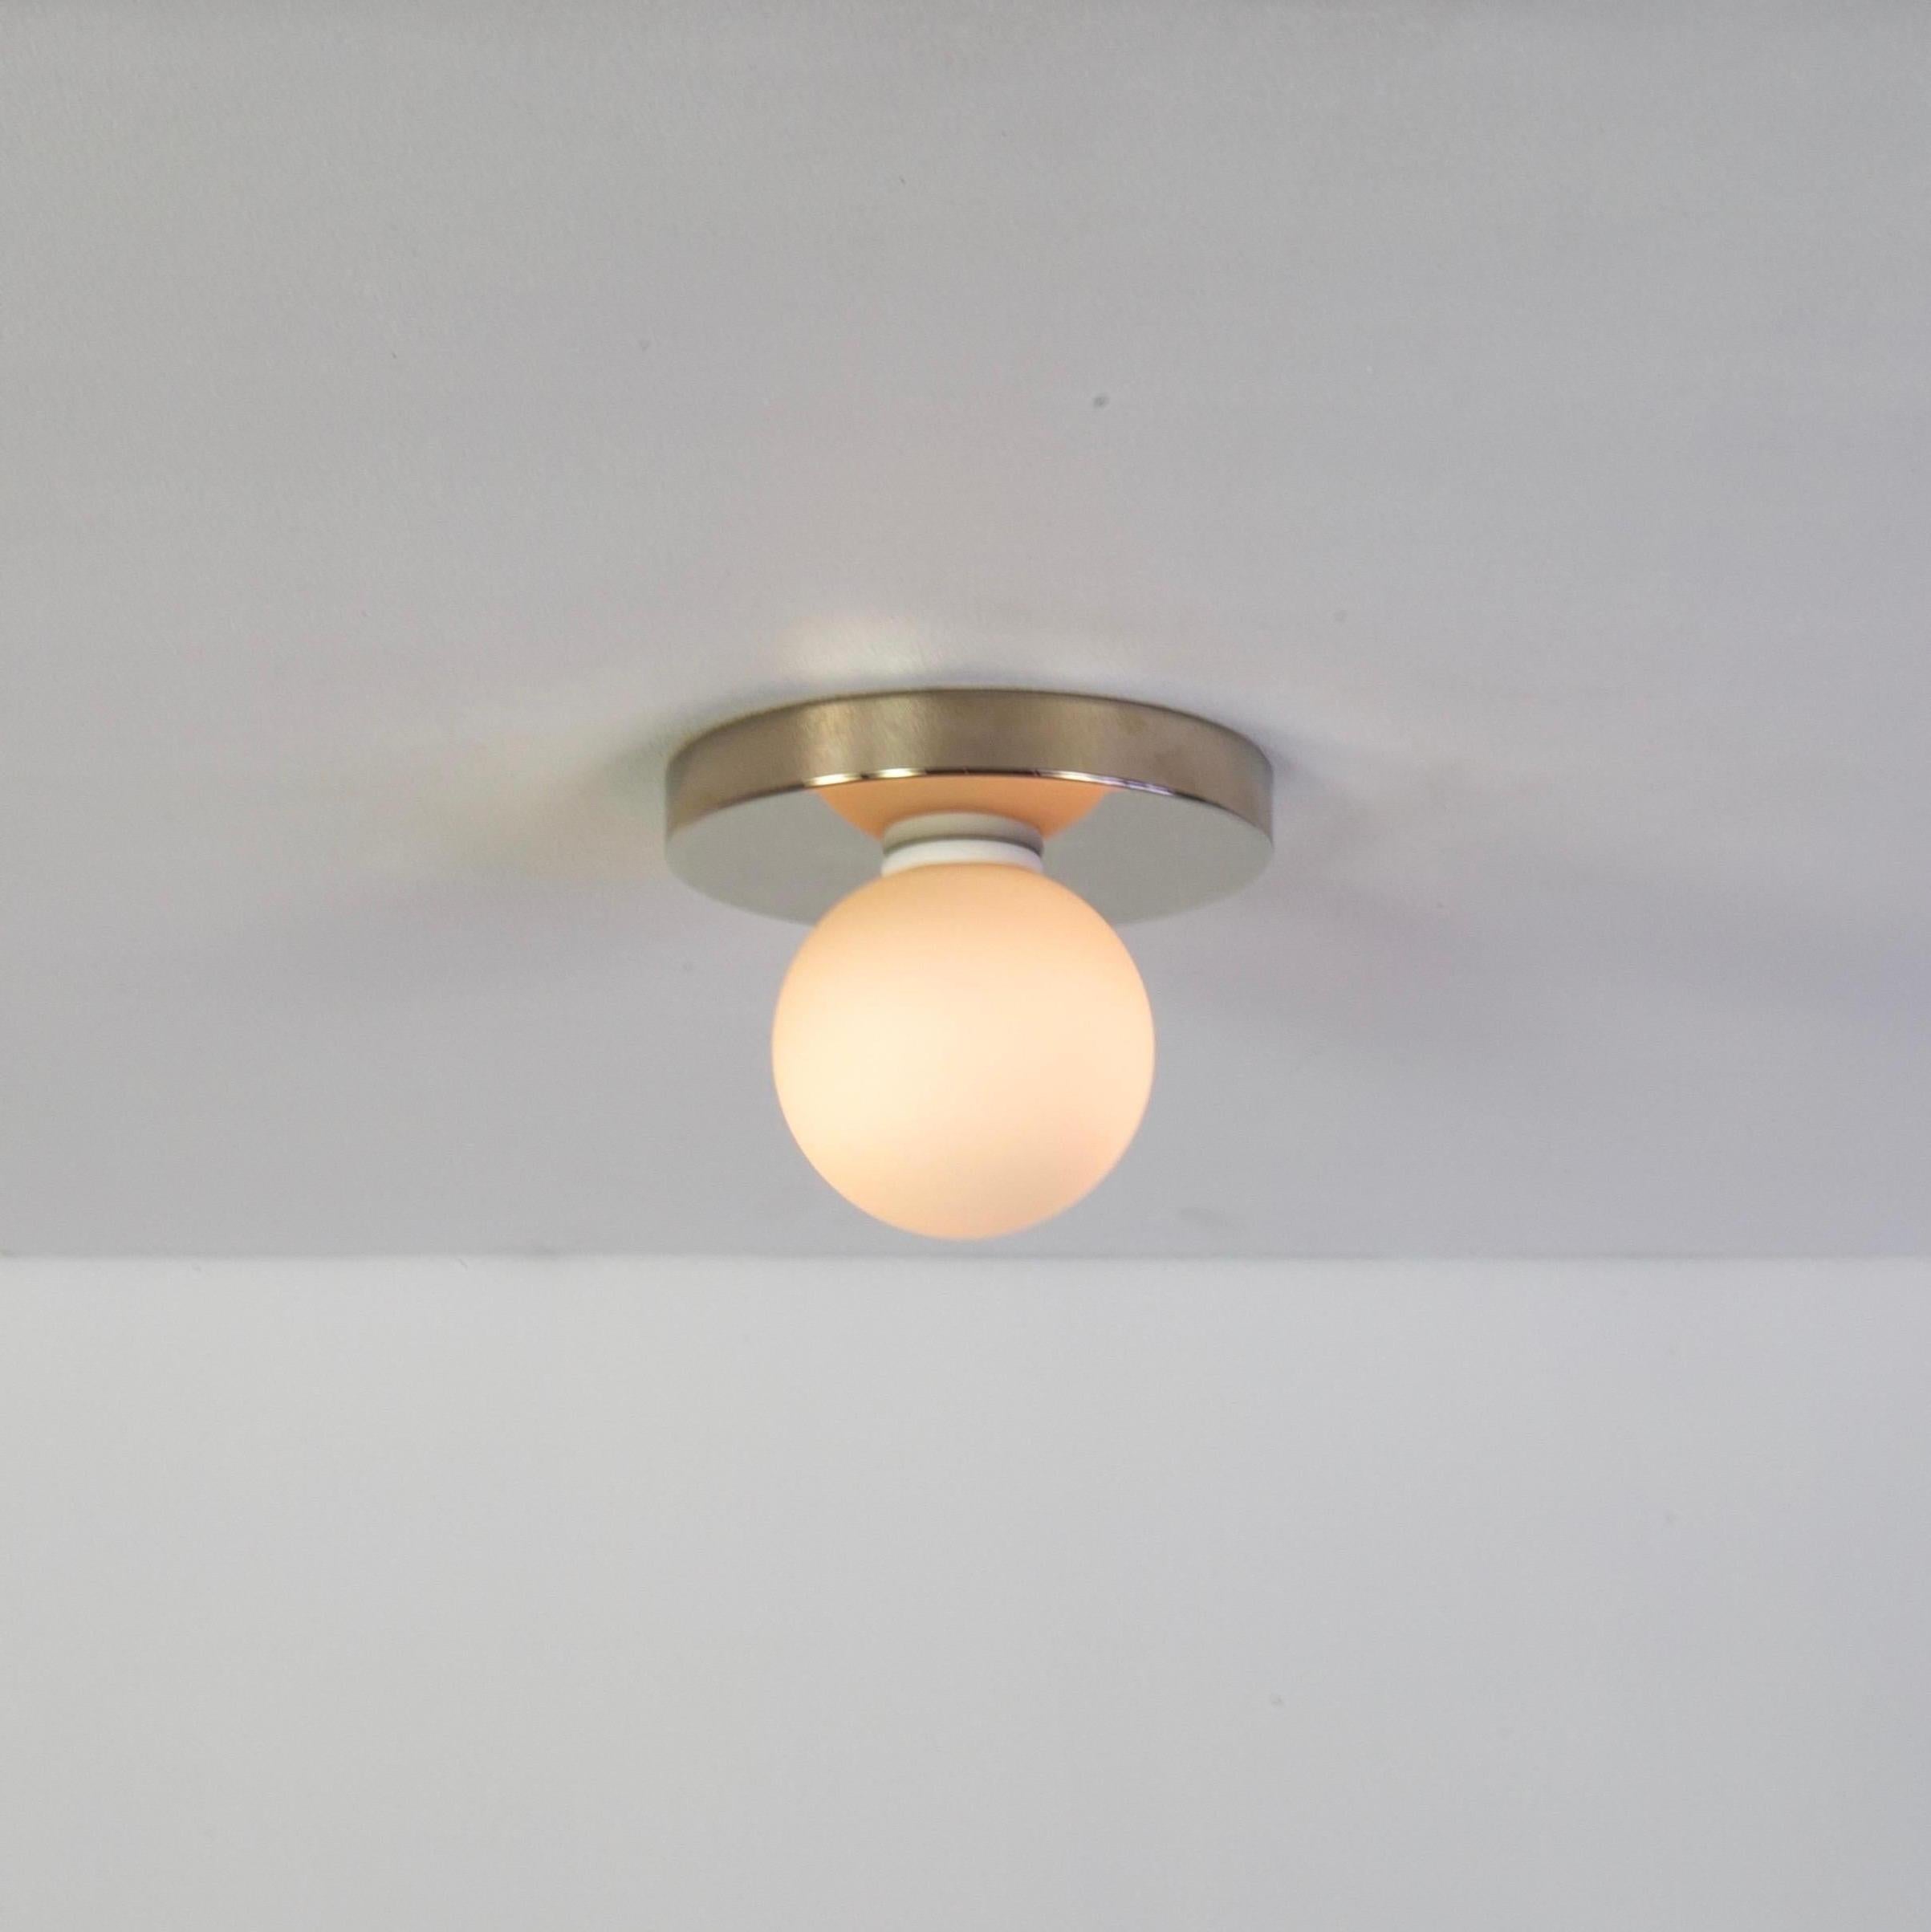 Plated Globe Flush Mount by Research.Lighting, Polished Nickel, Made to Order For Sale